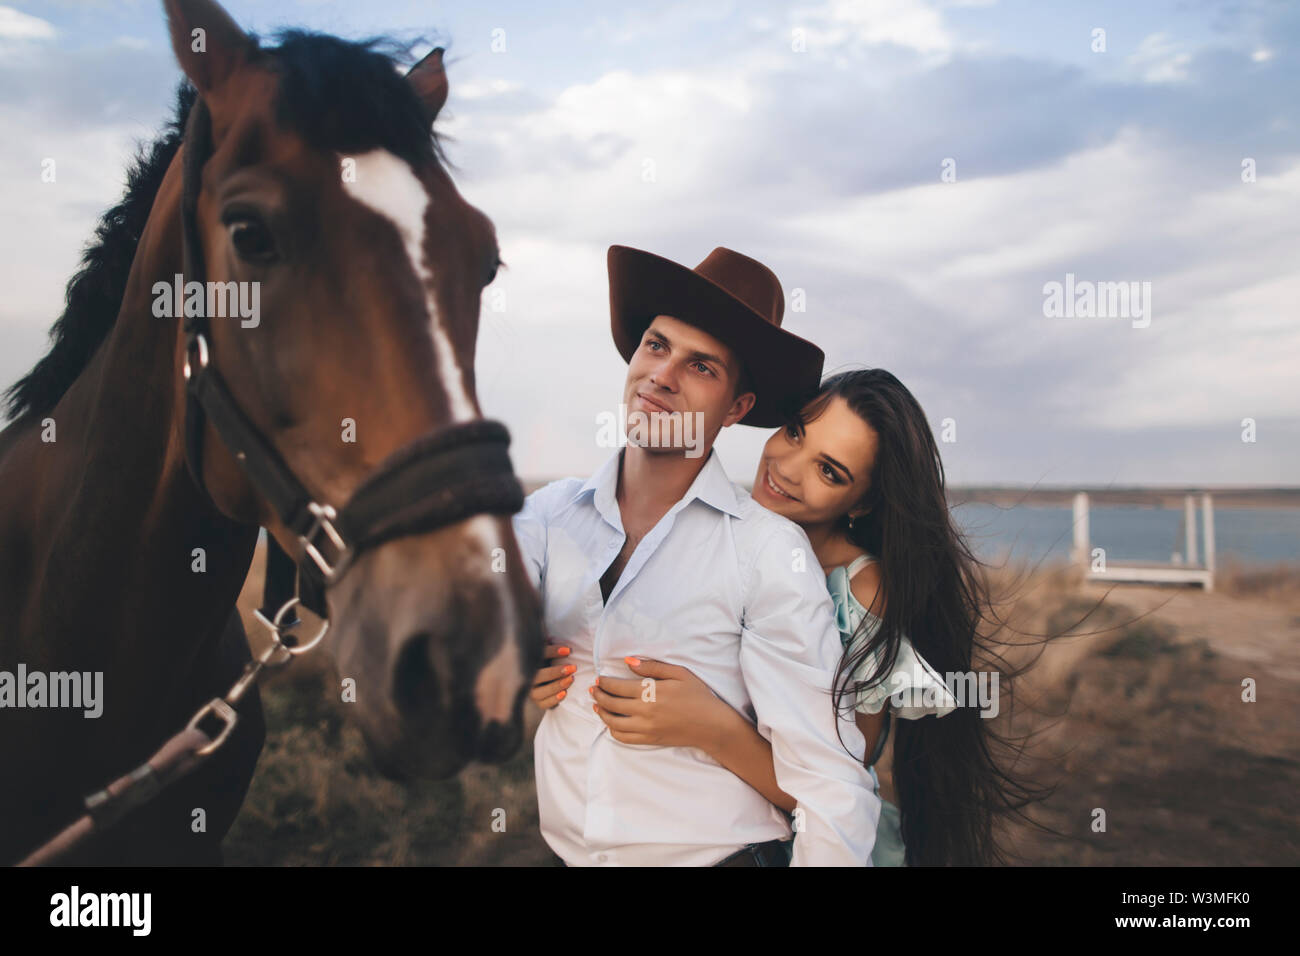 Young couple by horse Stock Photo